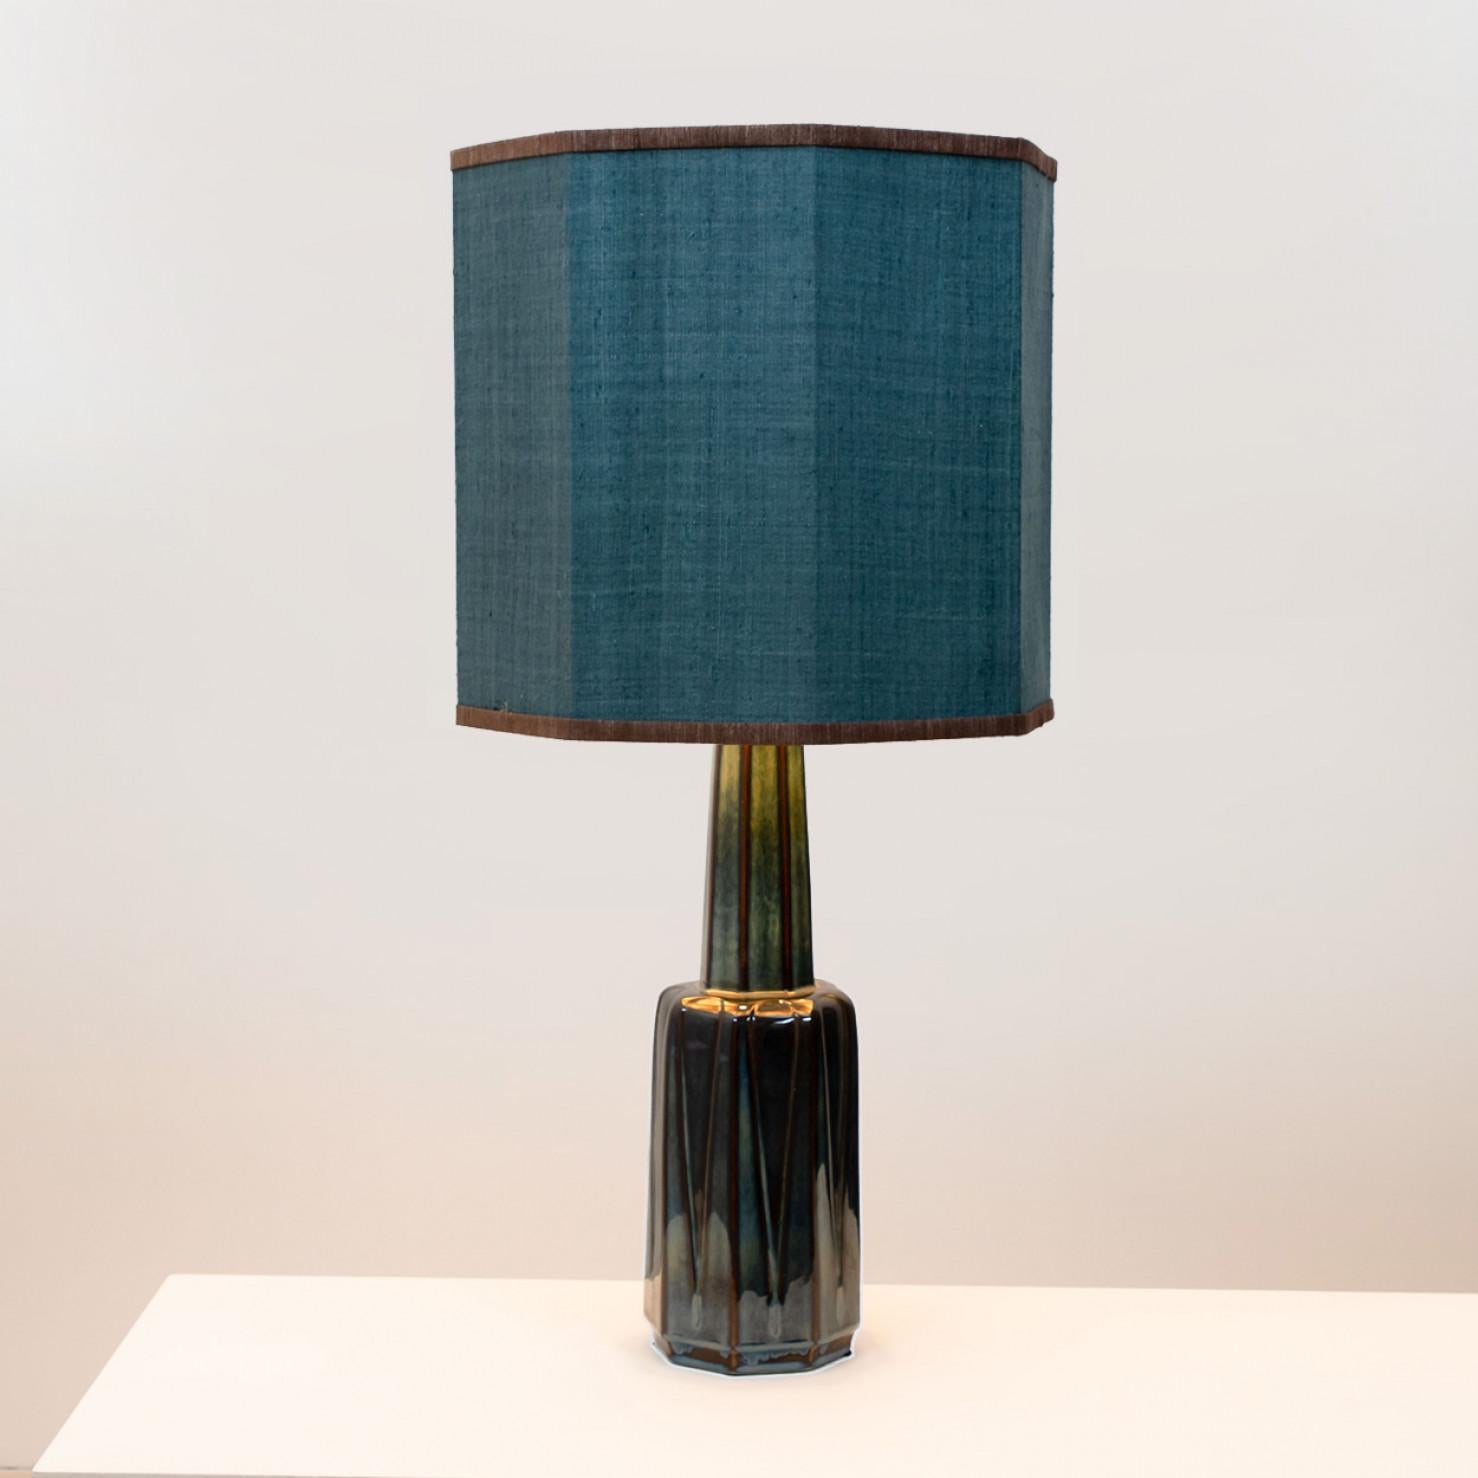 1 of the 2 Large Soholm Lamp with New Blue Silk Custom Made Lampshade Houben, 19 1